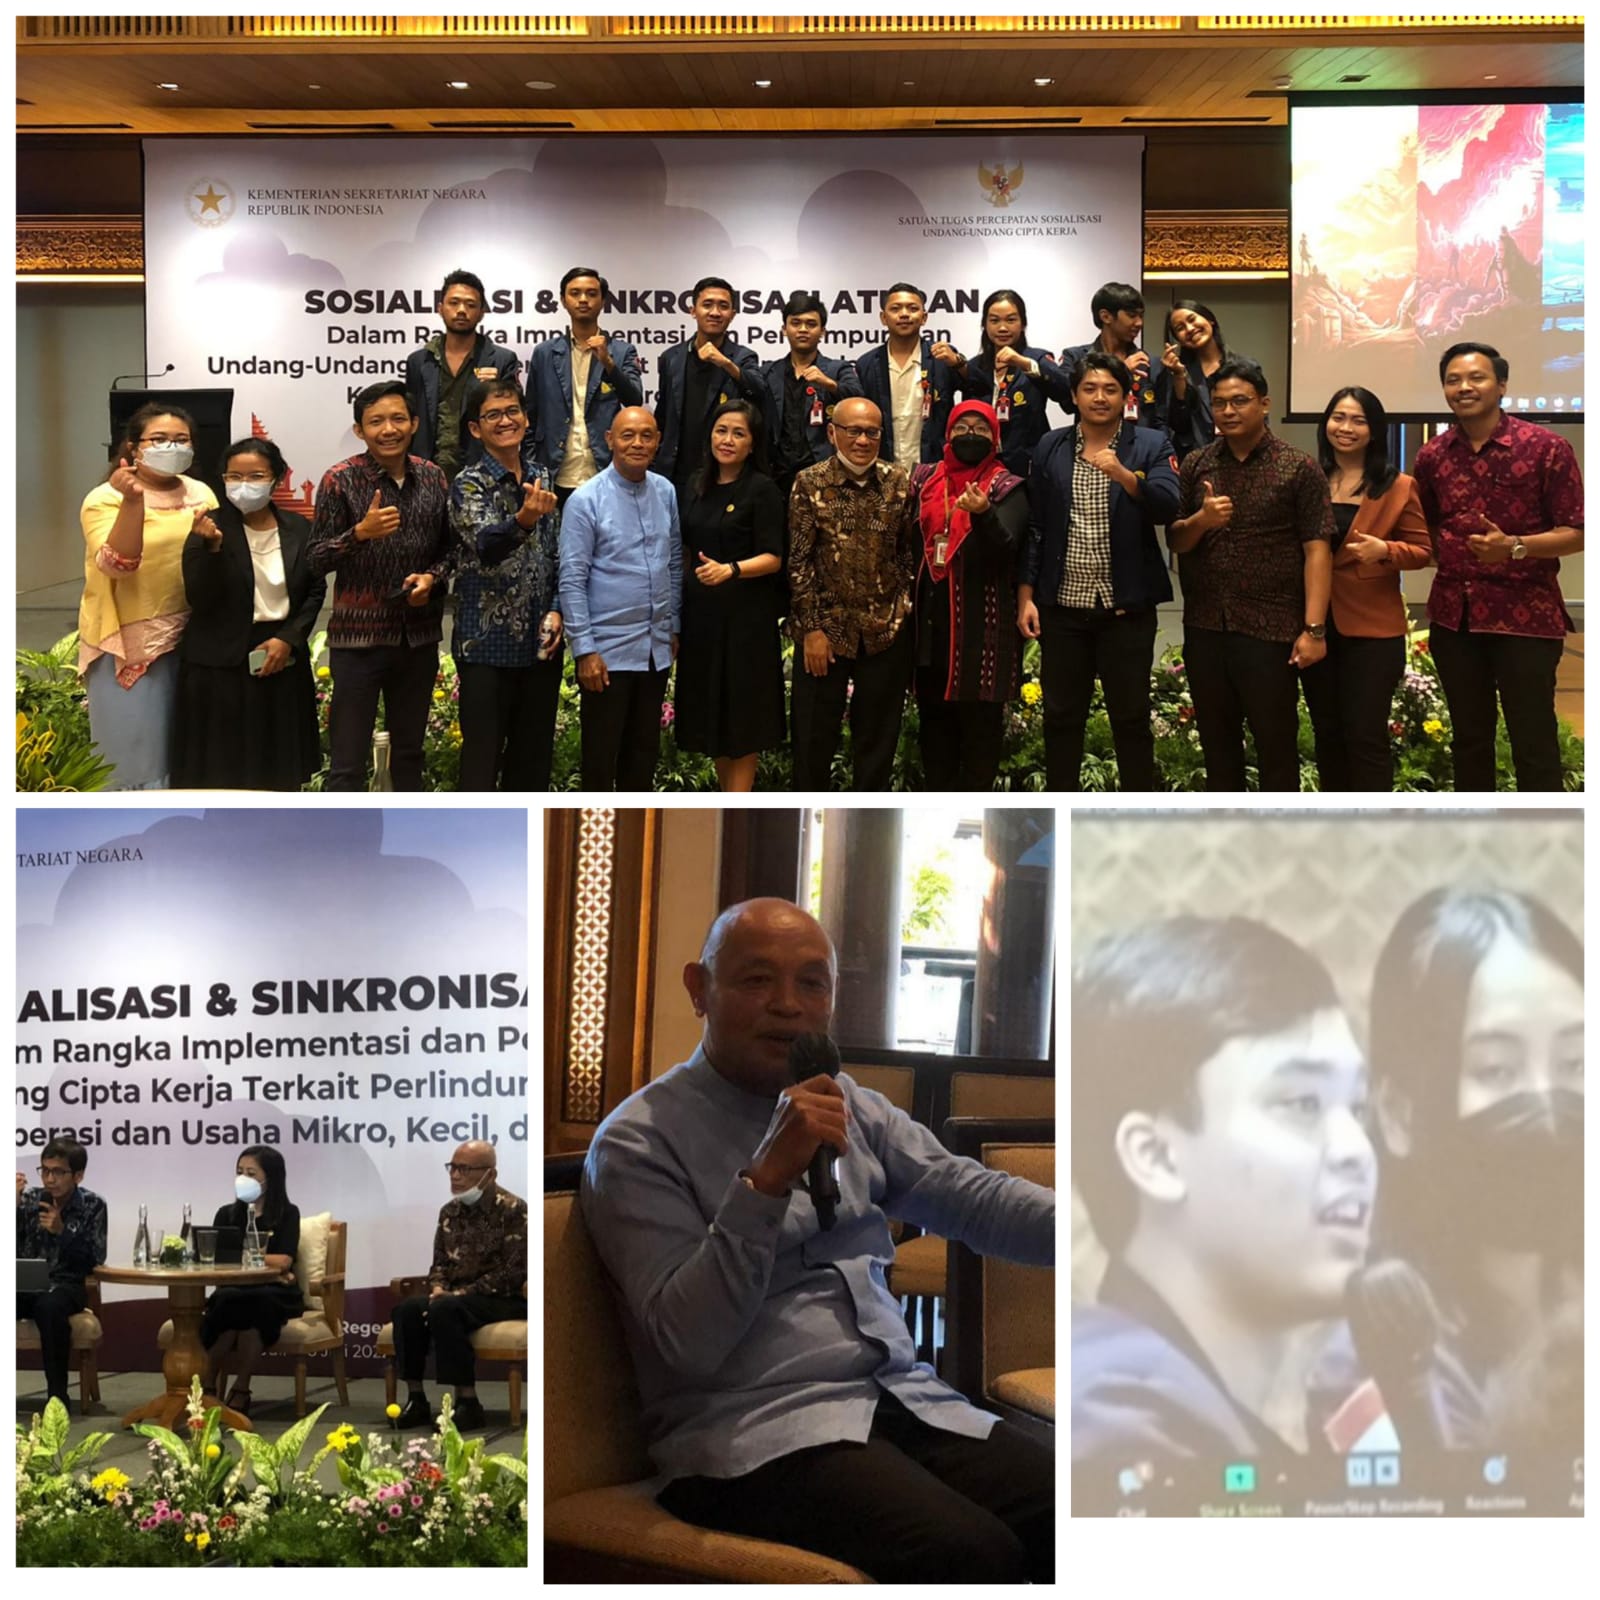 Academics and Students Attend Aspiration Netting FGD for the Implementation and Completion of the Job Creation Law